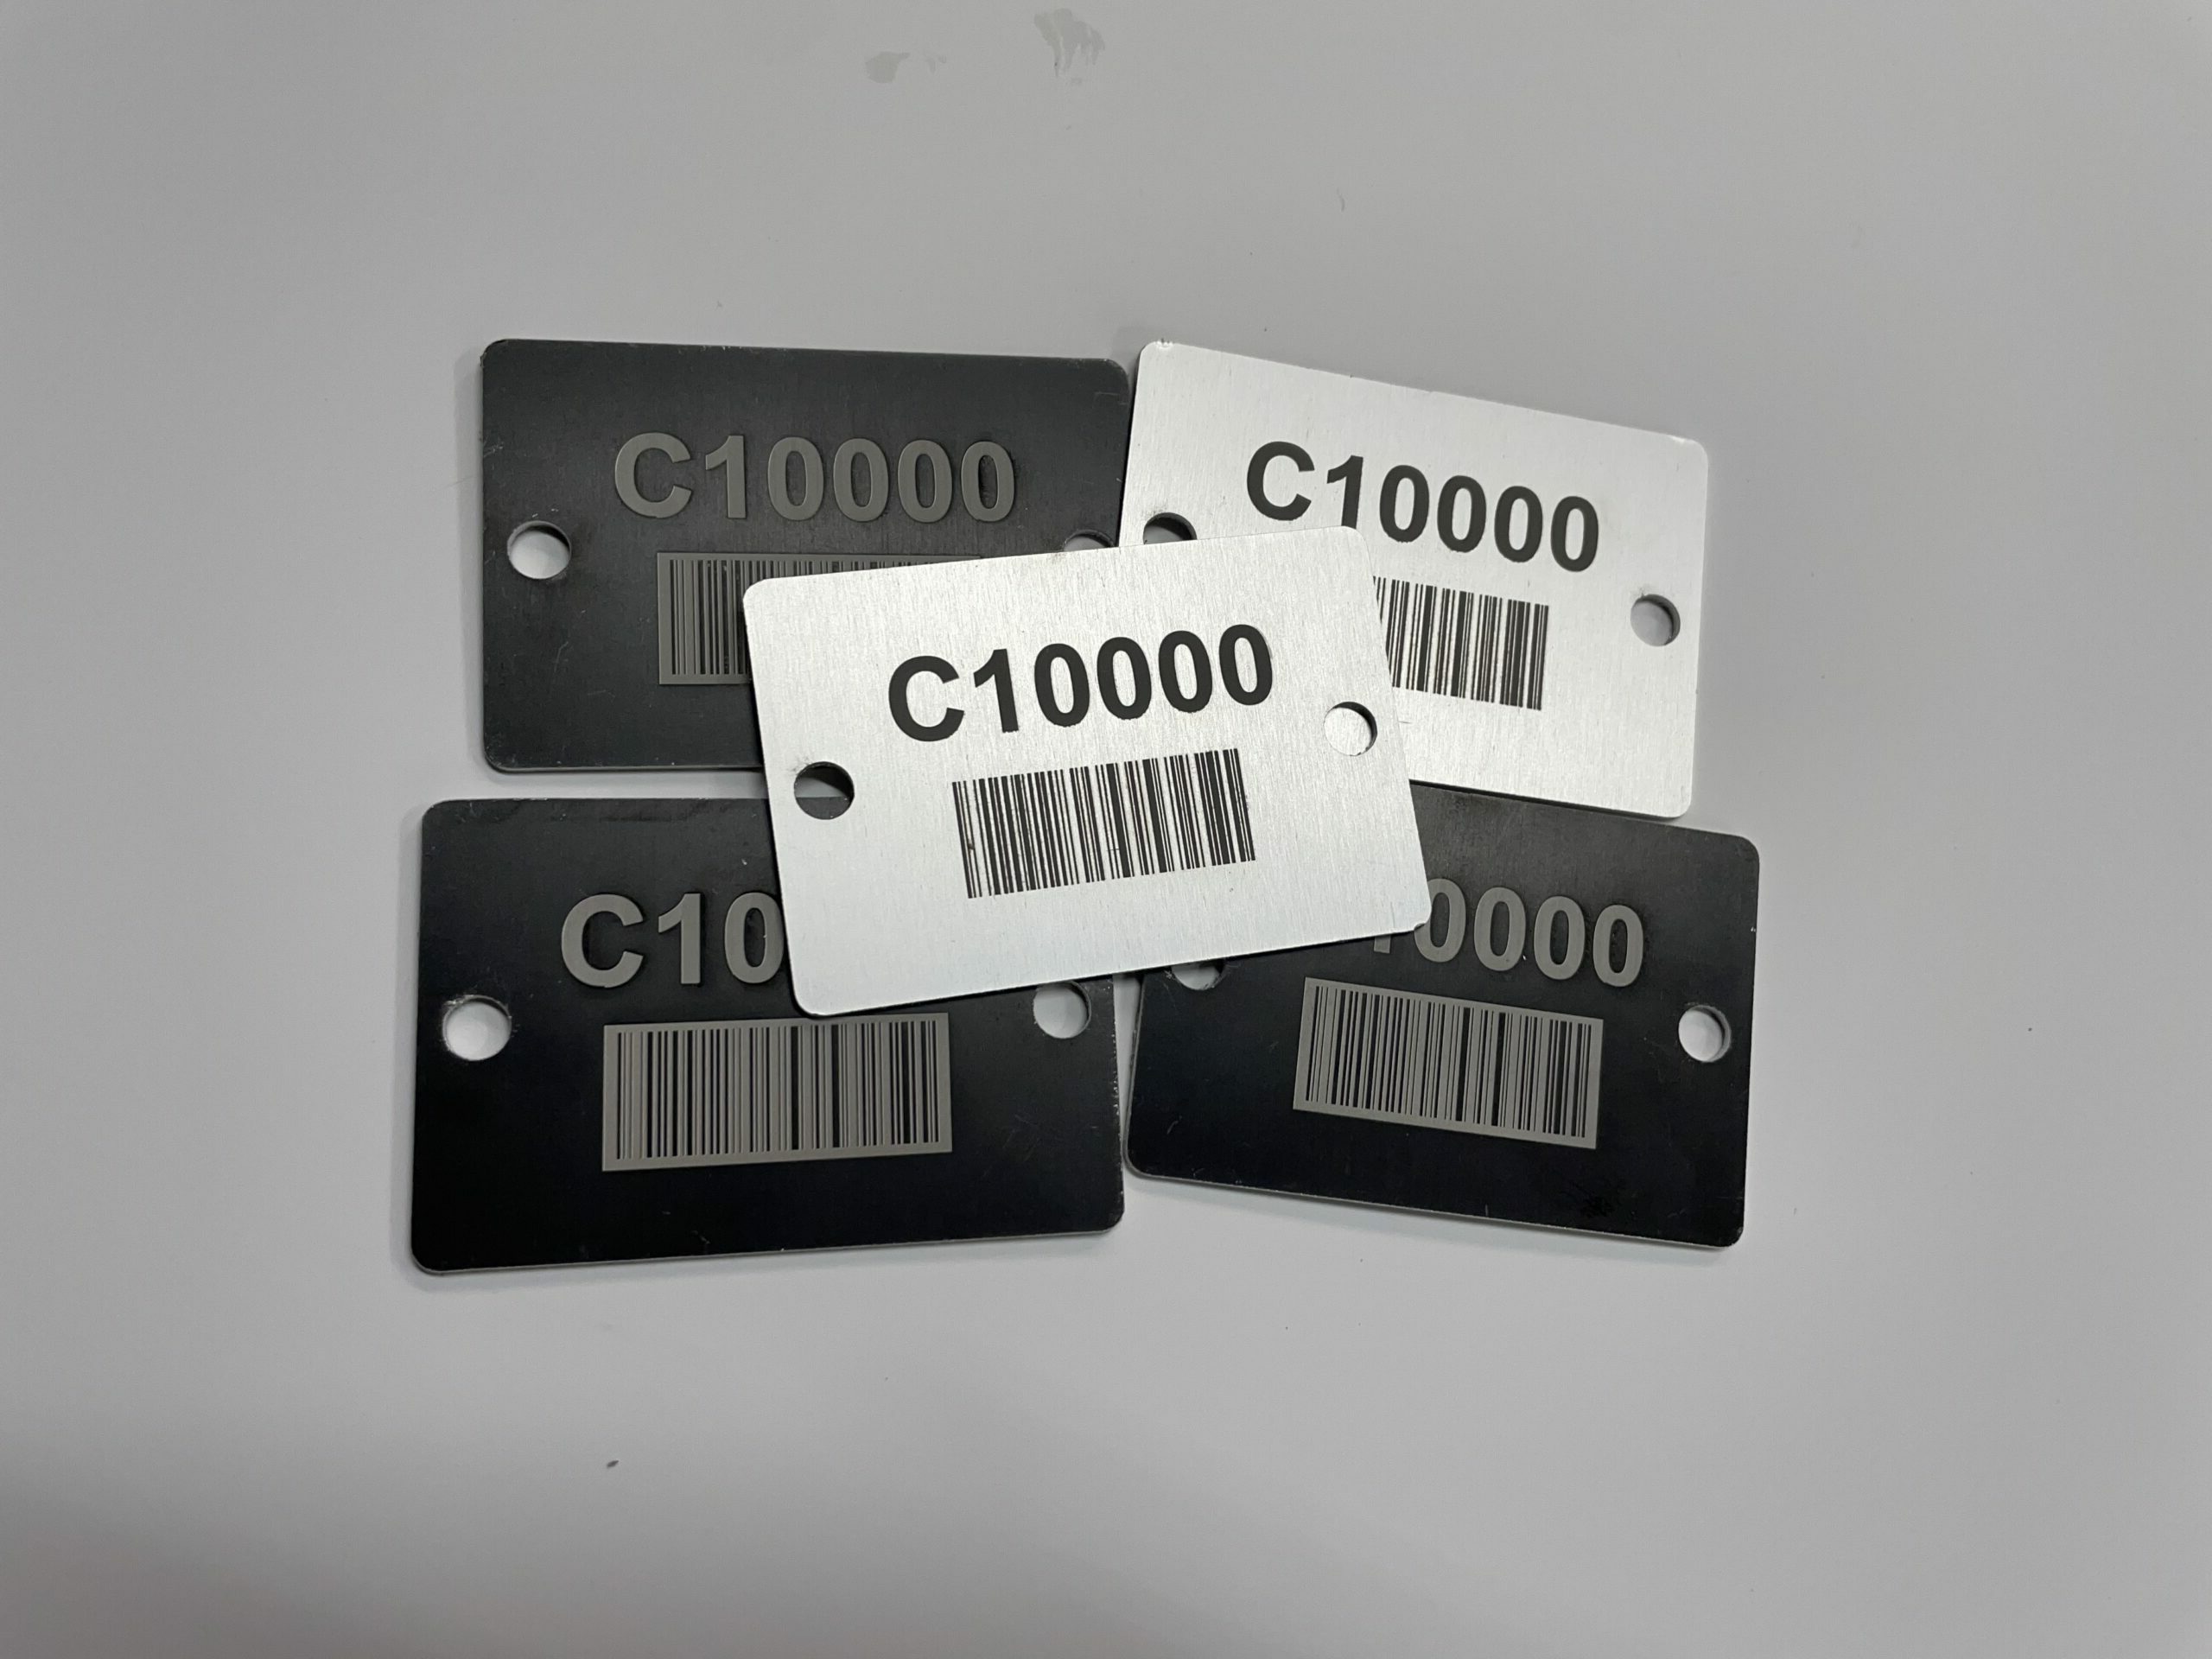 Numbered Tagging Systems: Lettering and Numbering on Metal Plates